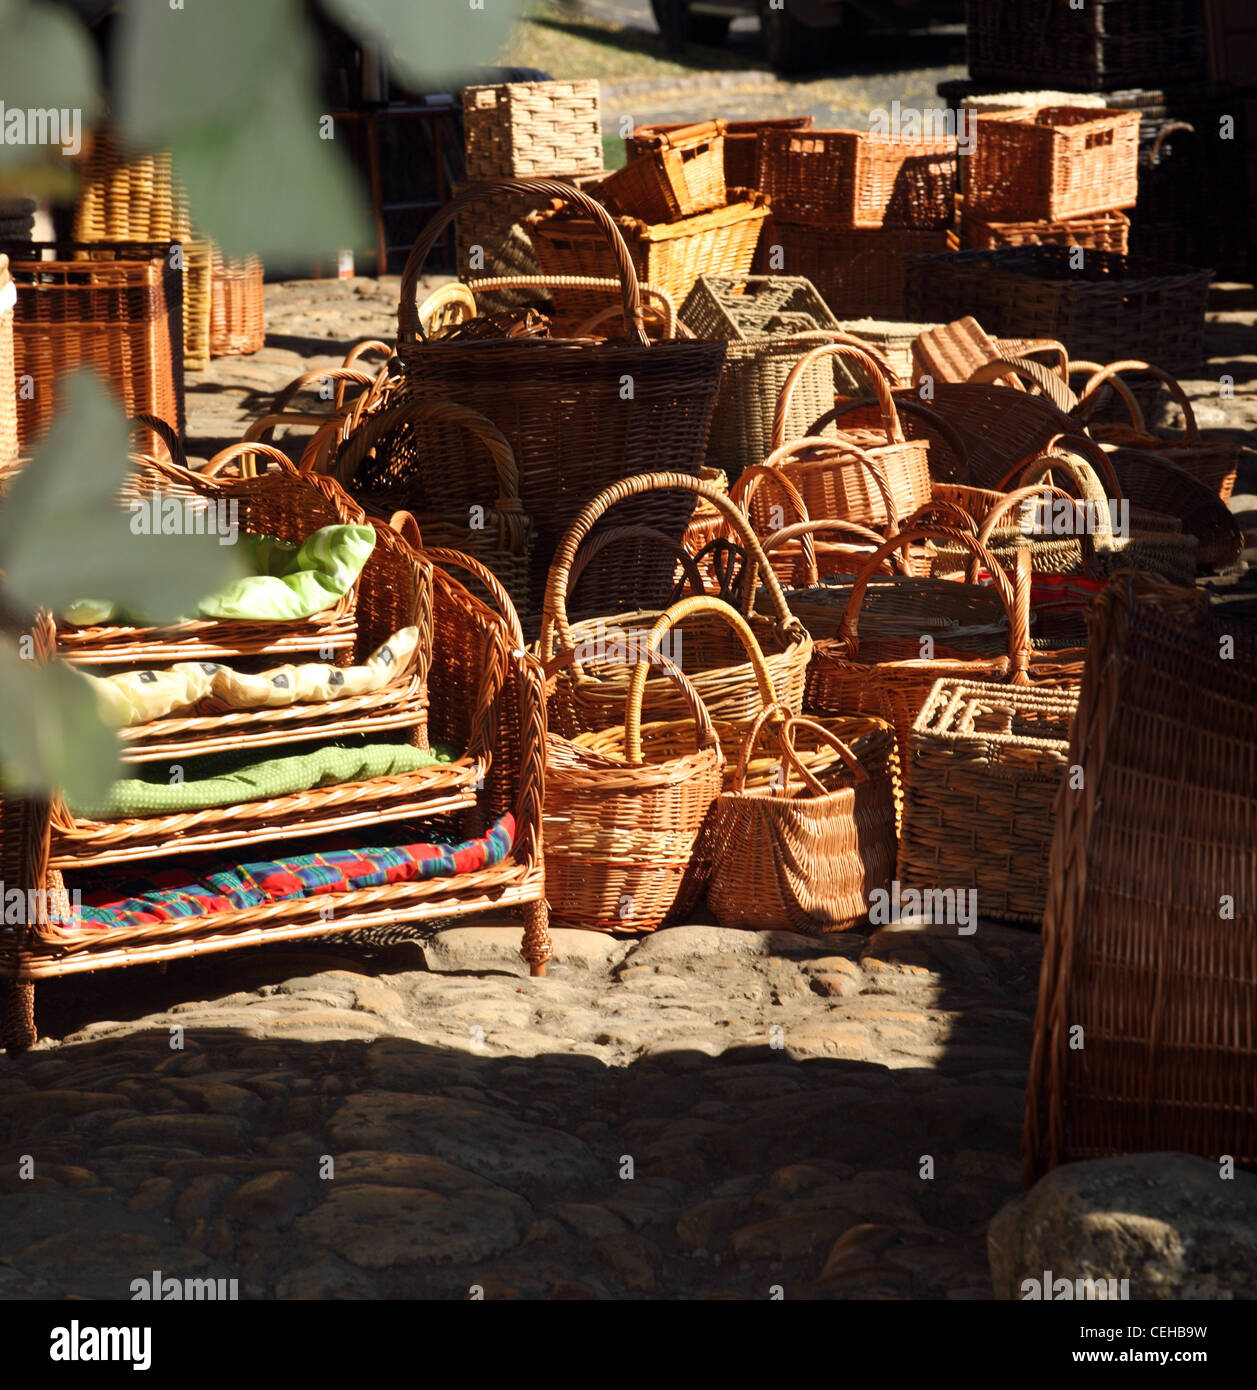 A collection of wicker baskets in bright sunshine inside Chipping Campden market hall, Cotswolds, Gloucestershire, UK Stock Photo